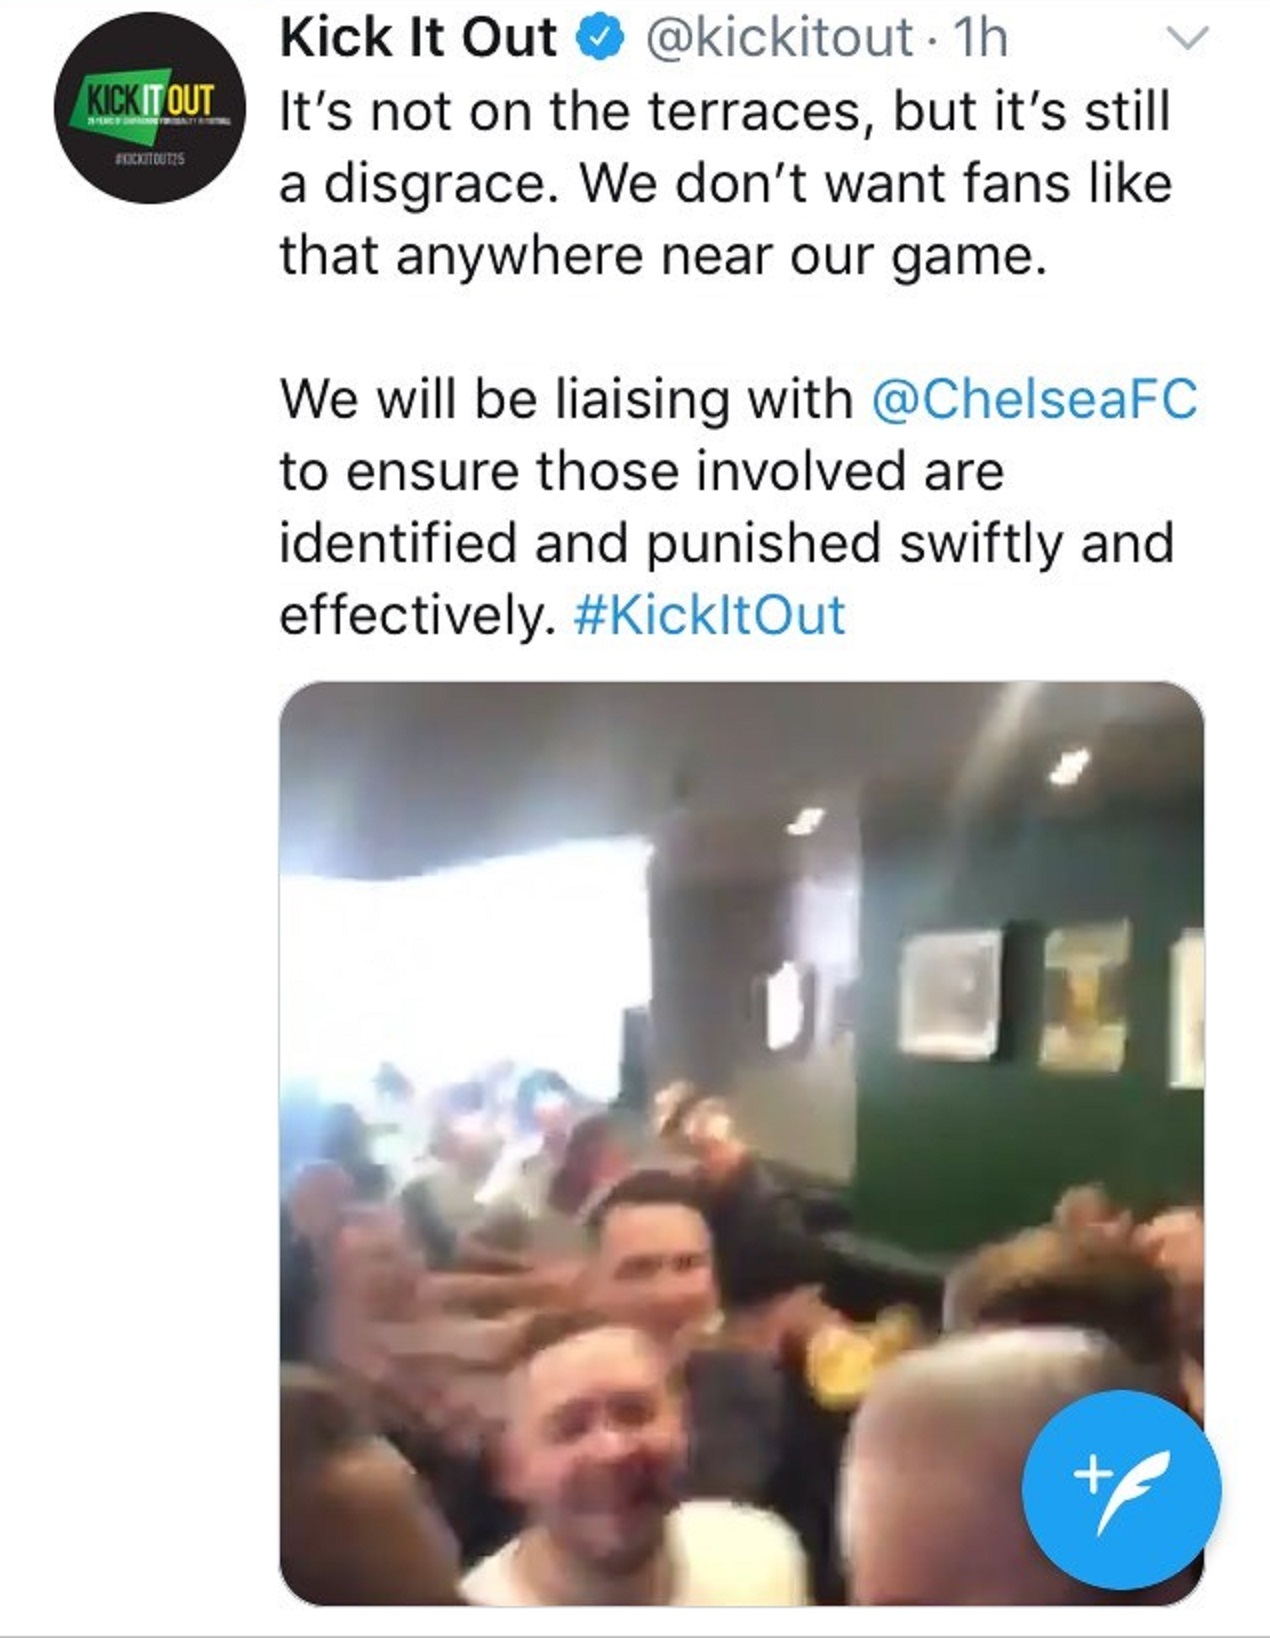 A screen grab taken from Kick It Out's Twitter account of a tweet showing video of racist chanting